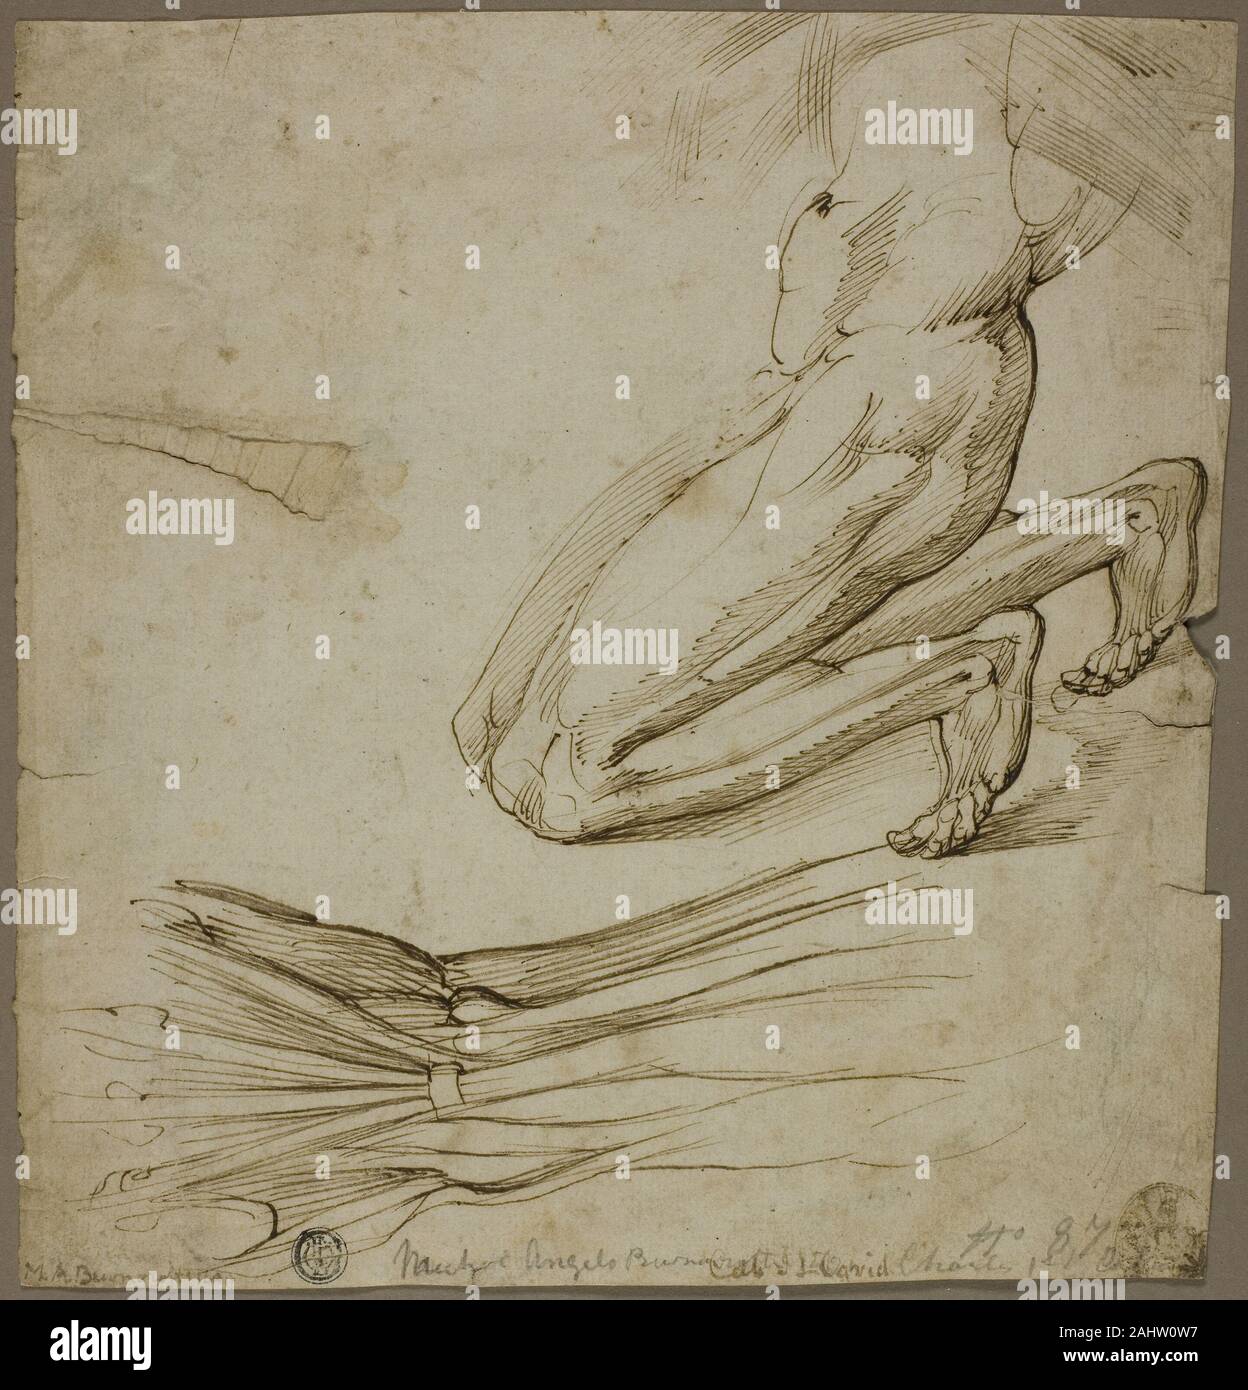 Follower of Michelangelo Buonarroti. Anatomical Study and Sketch of Kneeling Figure. 1475–1564. Italy. Pen and brown ink on ivory laid paper Stock Photo